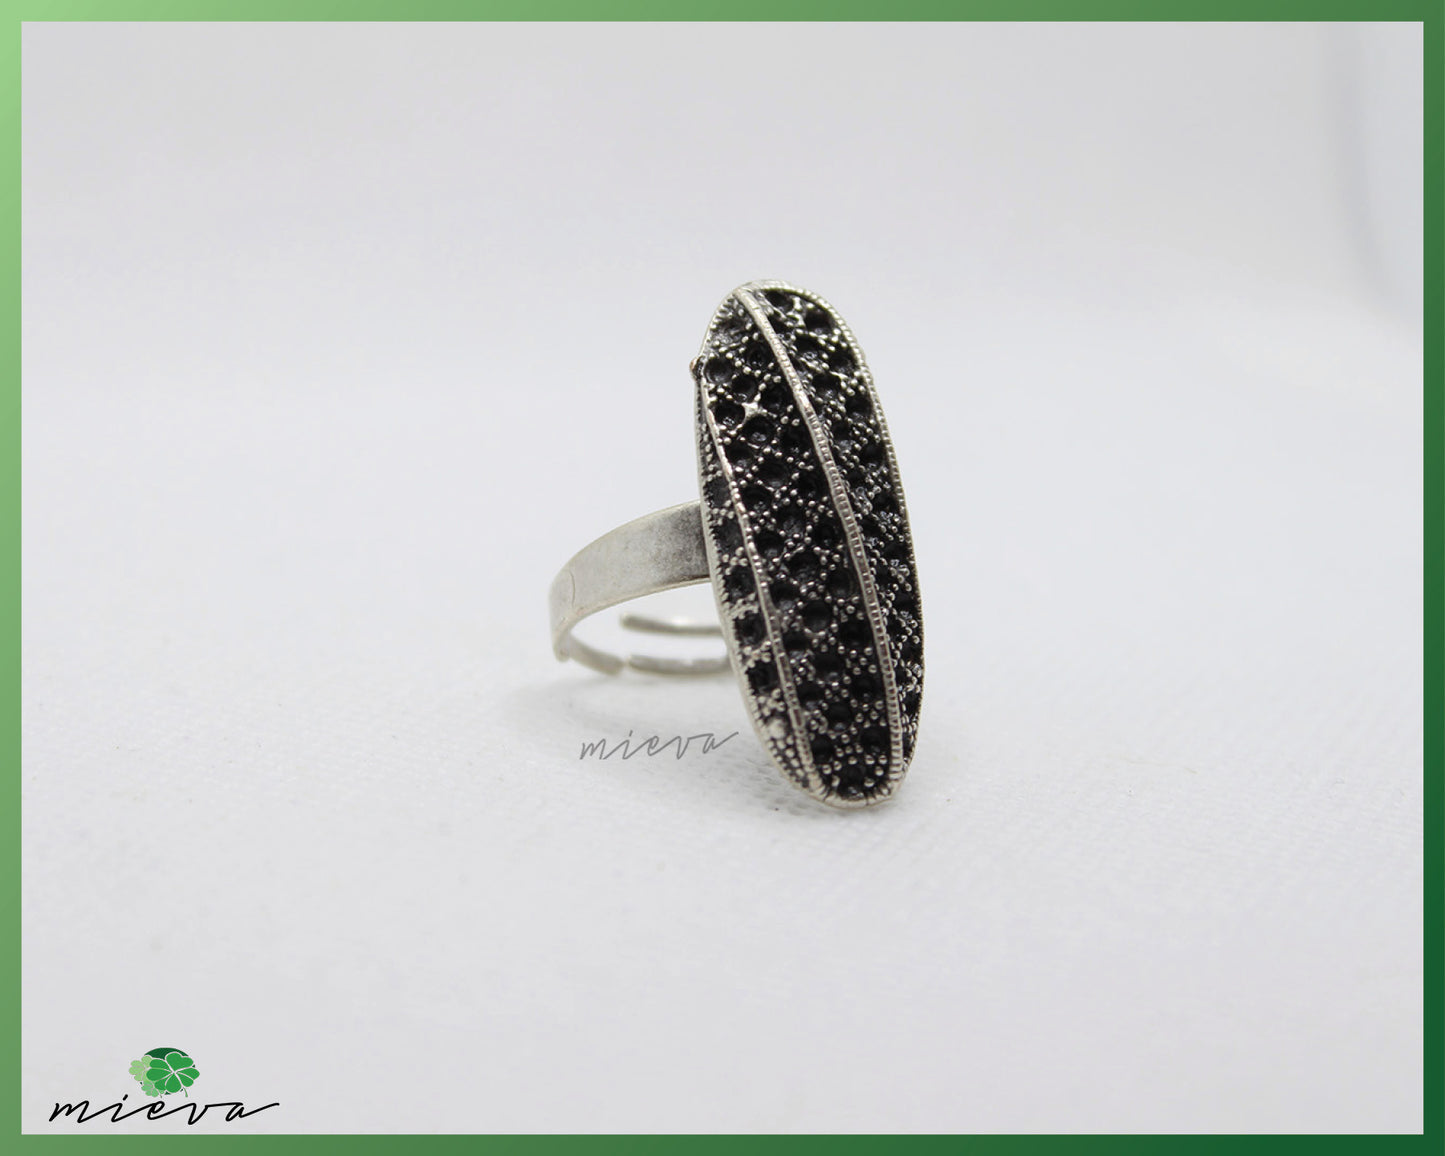 Vintage-Inspired Marcasite Silver Statement Ring